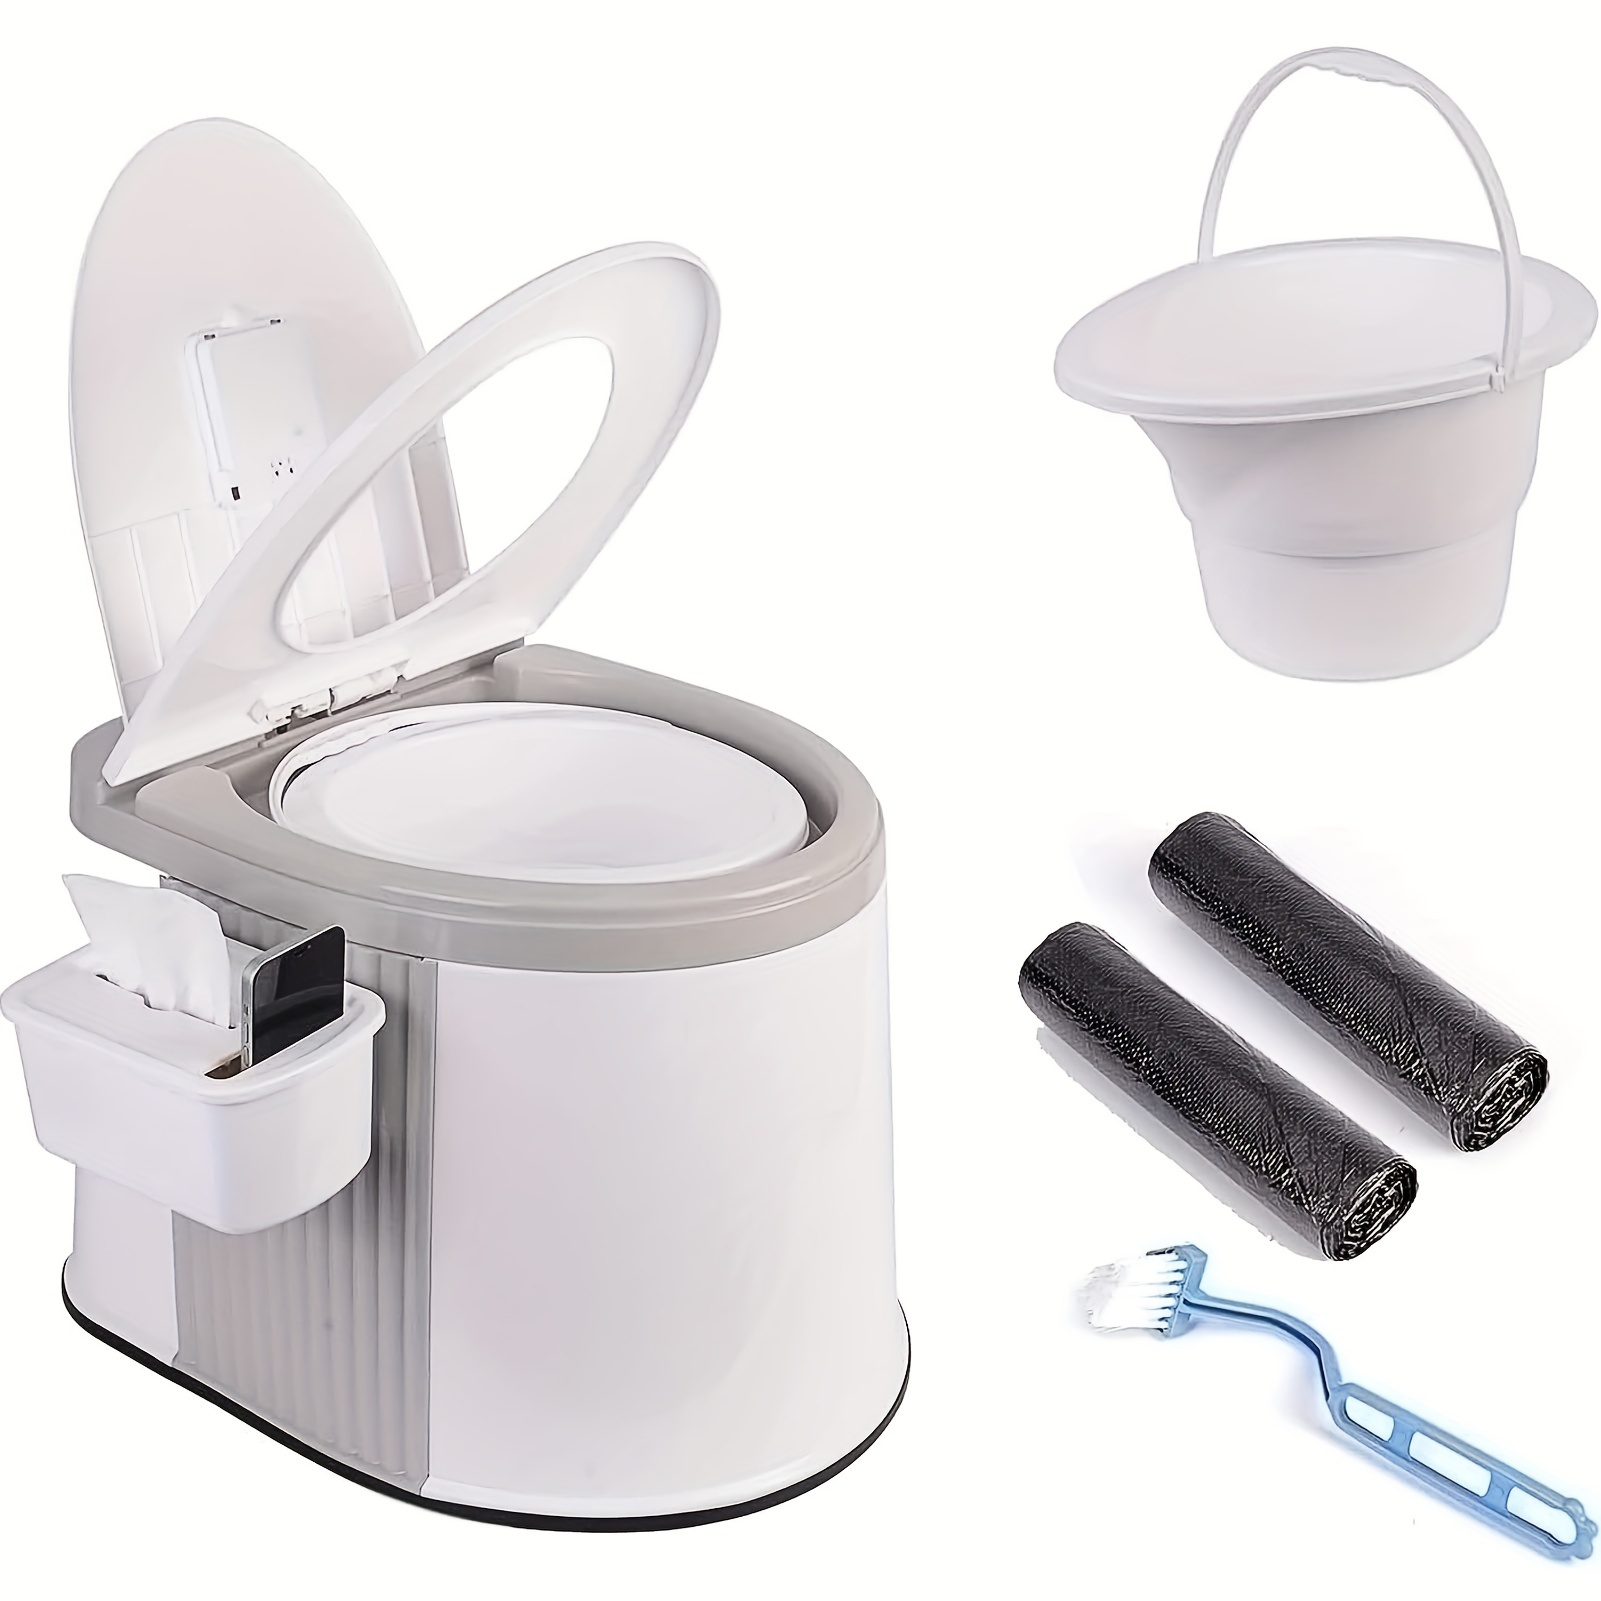 

Portable Toilet, Indoor Outdoor Commode With Detachable Inner Bucket And Paper Holder, Lightweight & Compact For Camping, Hiking, Boat, Van